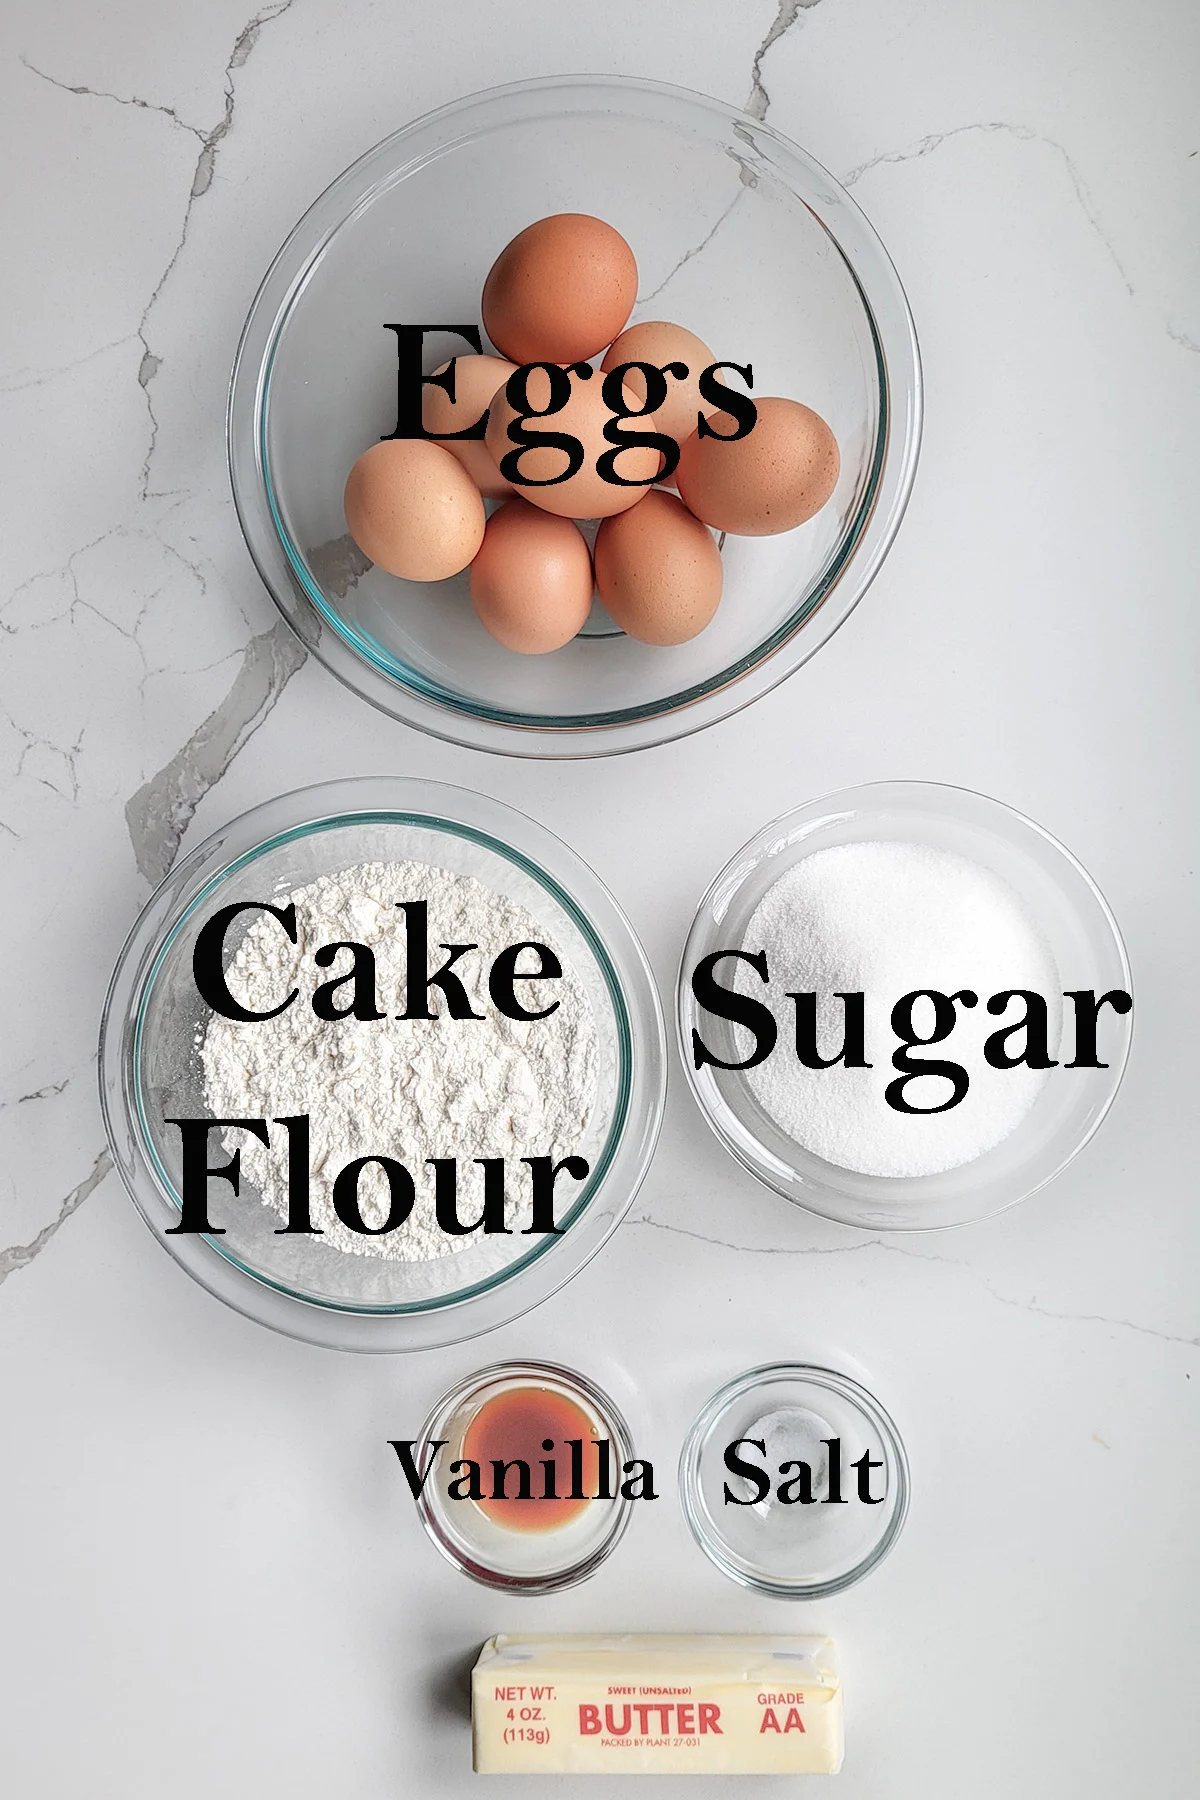 ingredients for genoise sponge cake in bowls with text overlay.